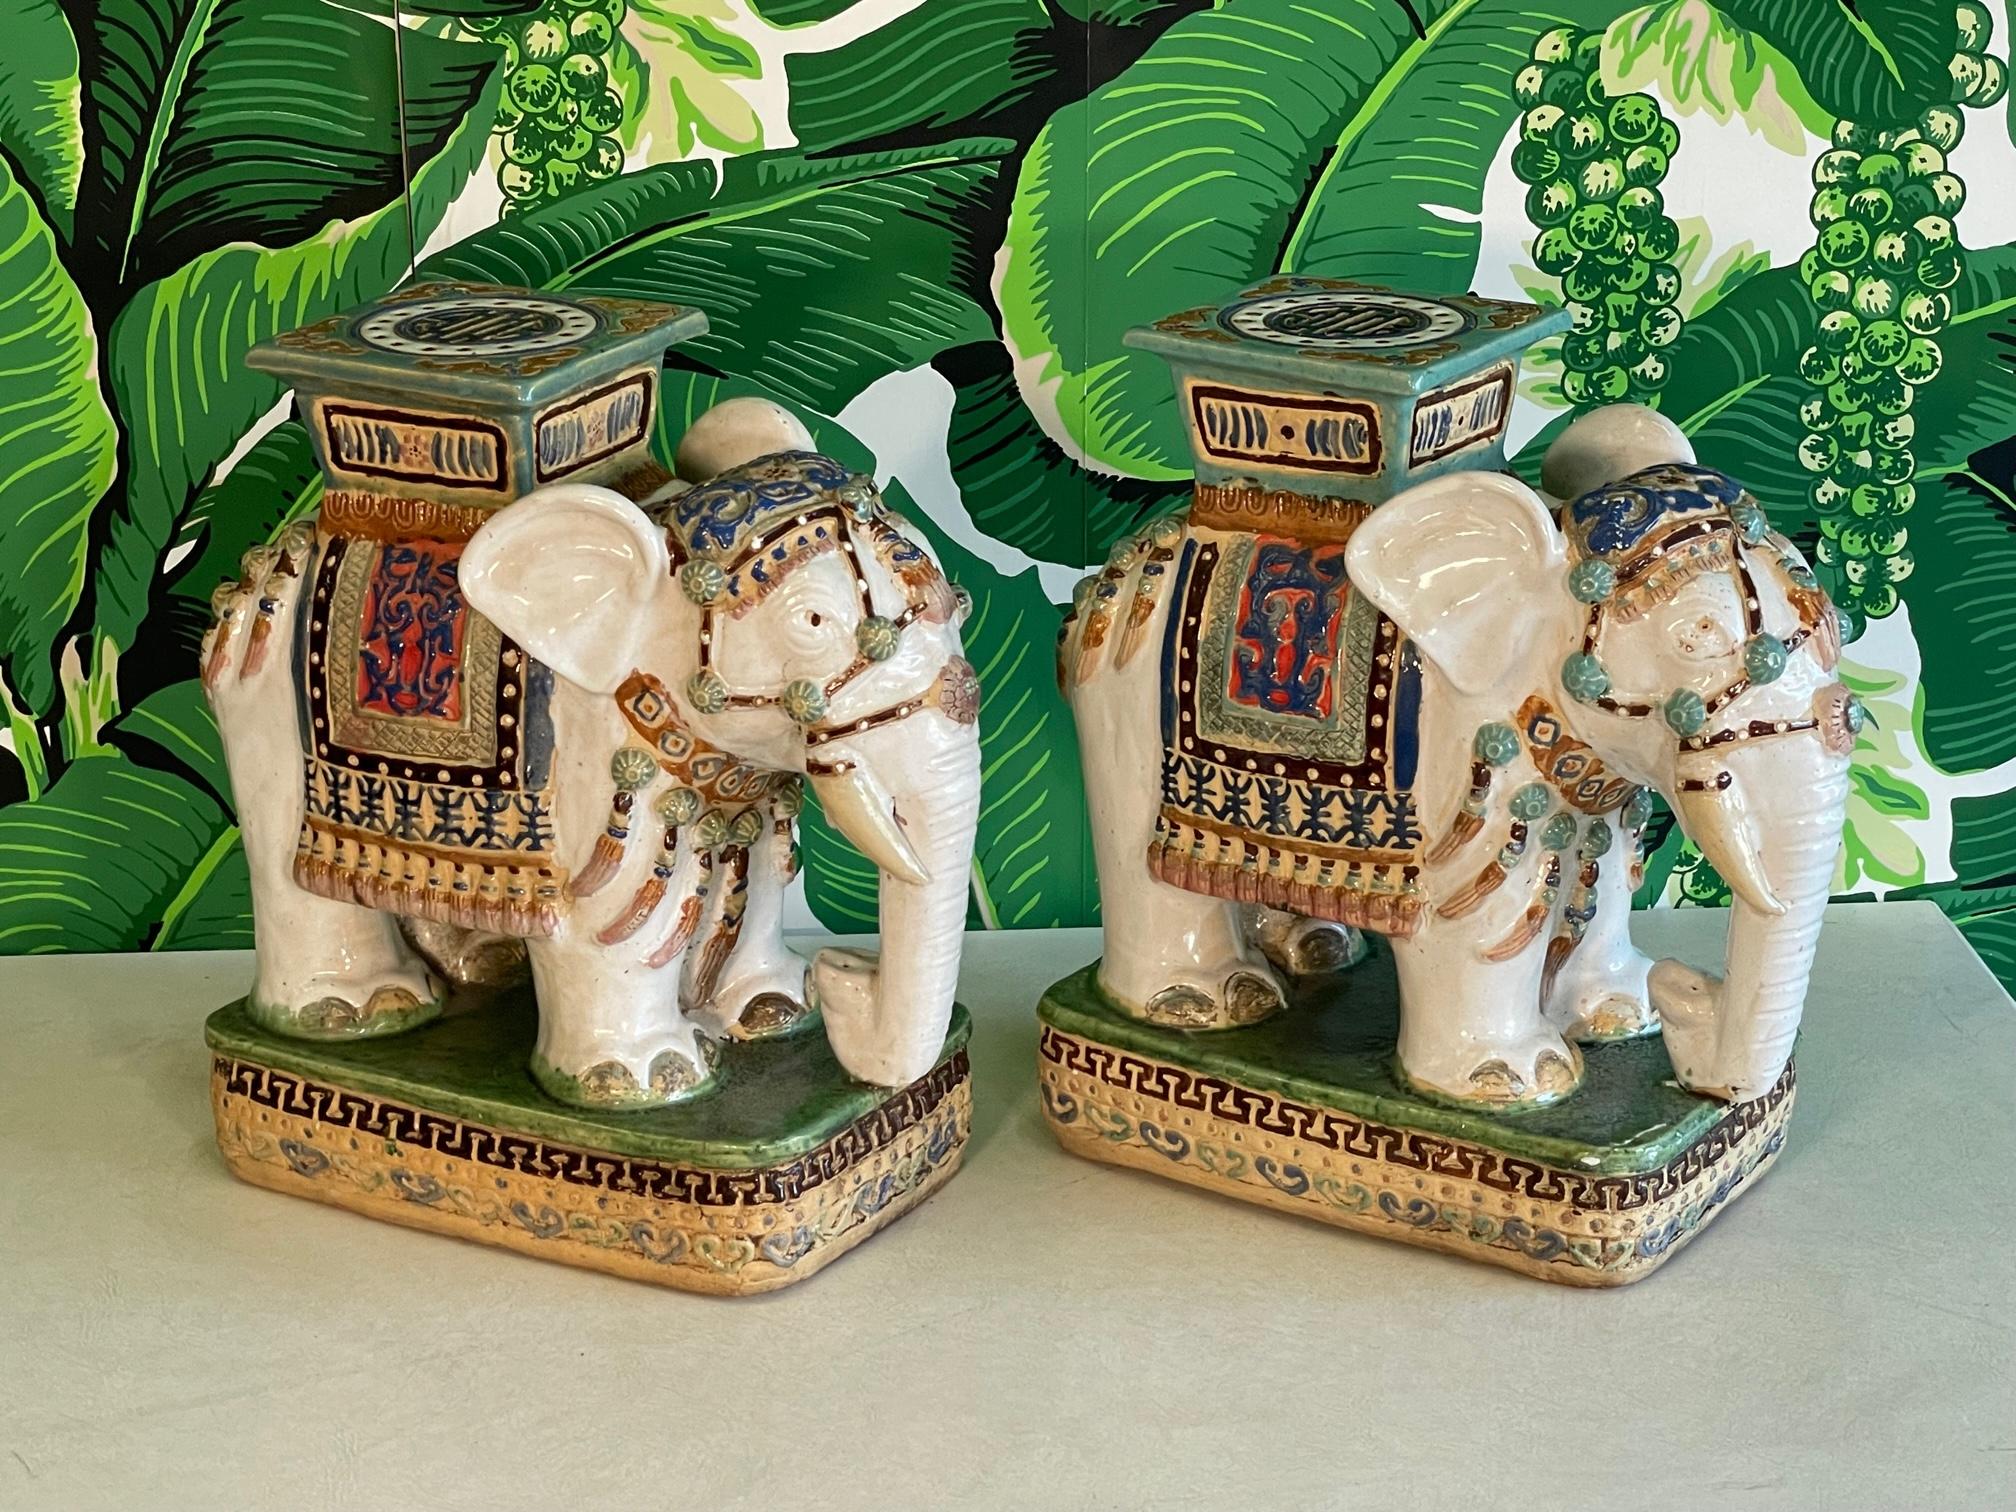 Pair of midcentury glazed terracotta elephant garden footstools / seats / stands a white glossy finish with accenting colors. Very good condition. As with all our vintage items, may exhibit scuffs, marks, or wear, see photos for details. 

